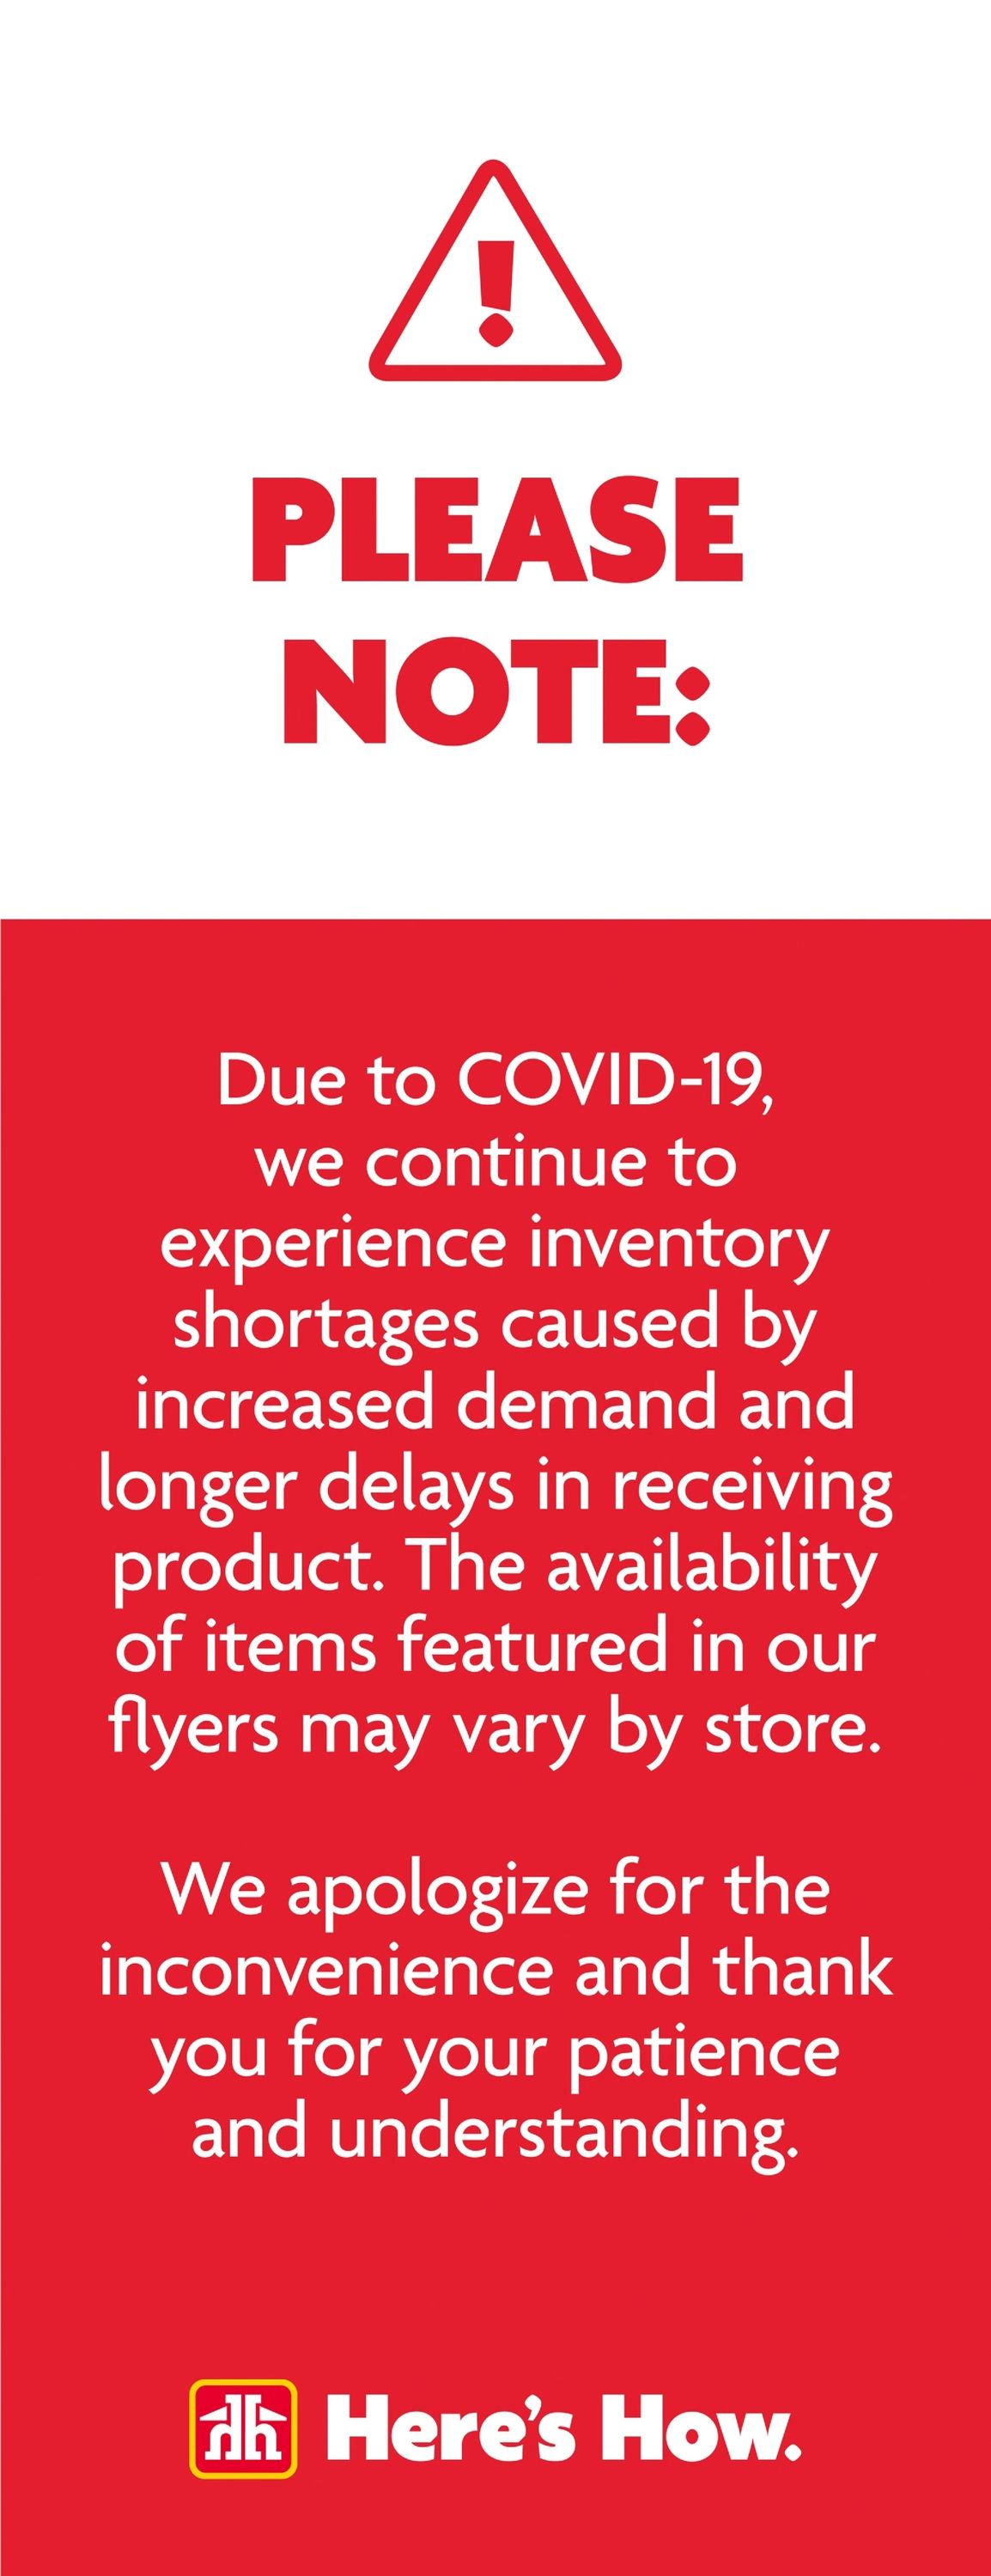 Home Hardware Flyer from 03/24/2022